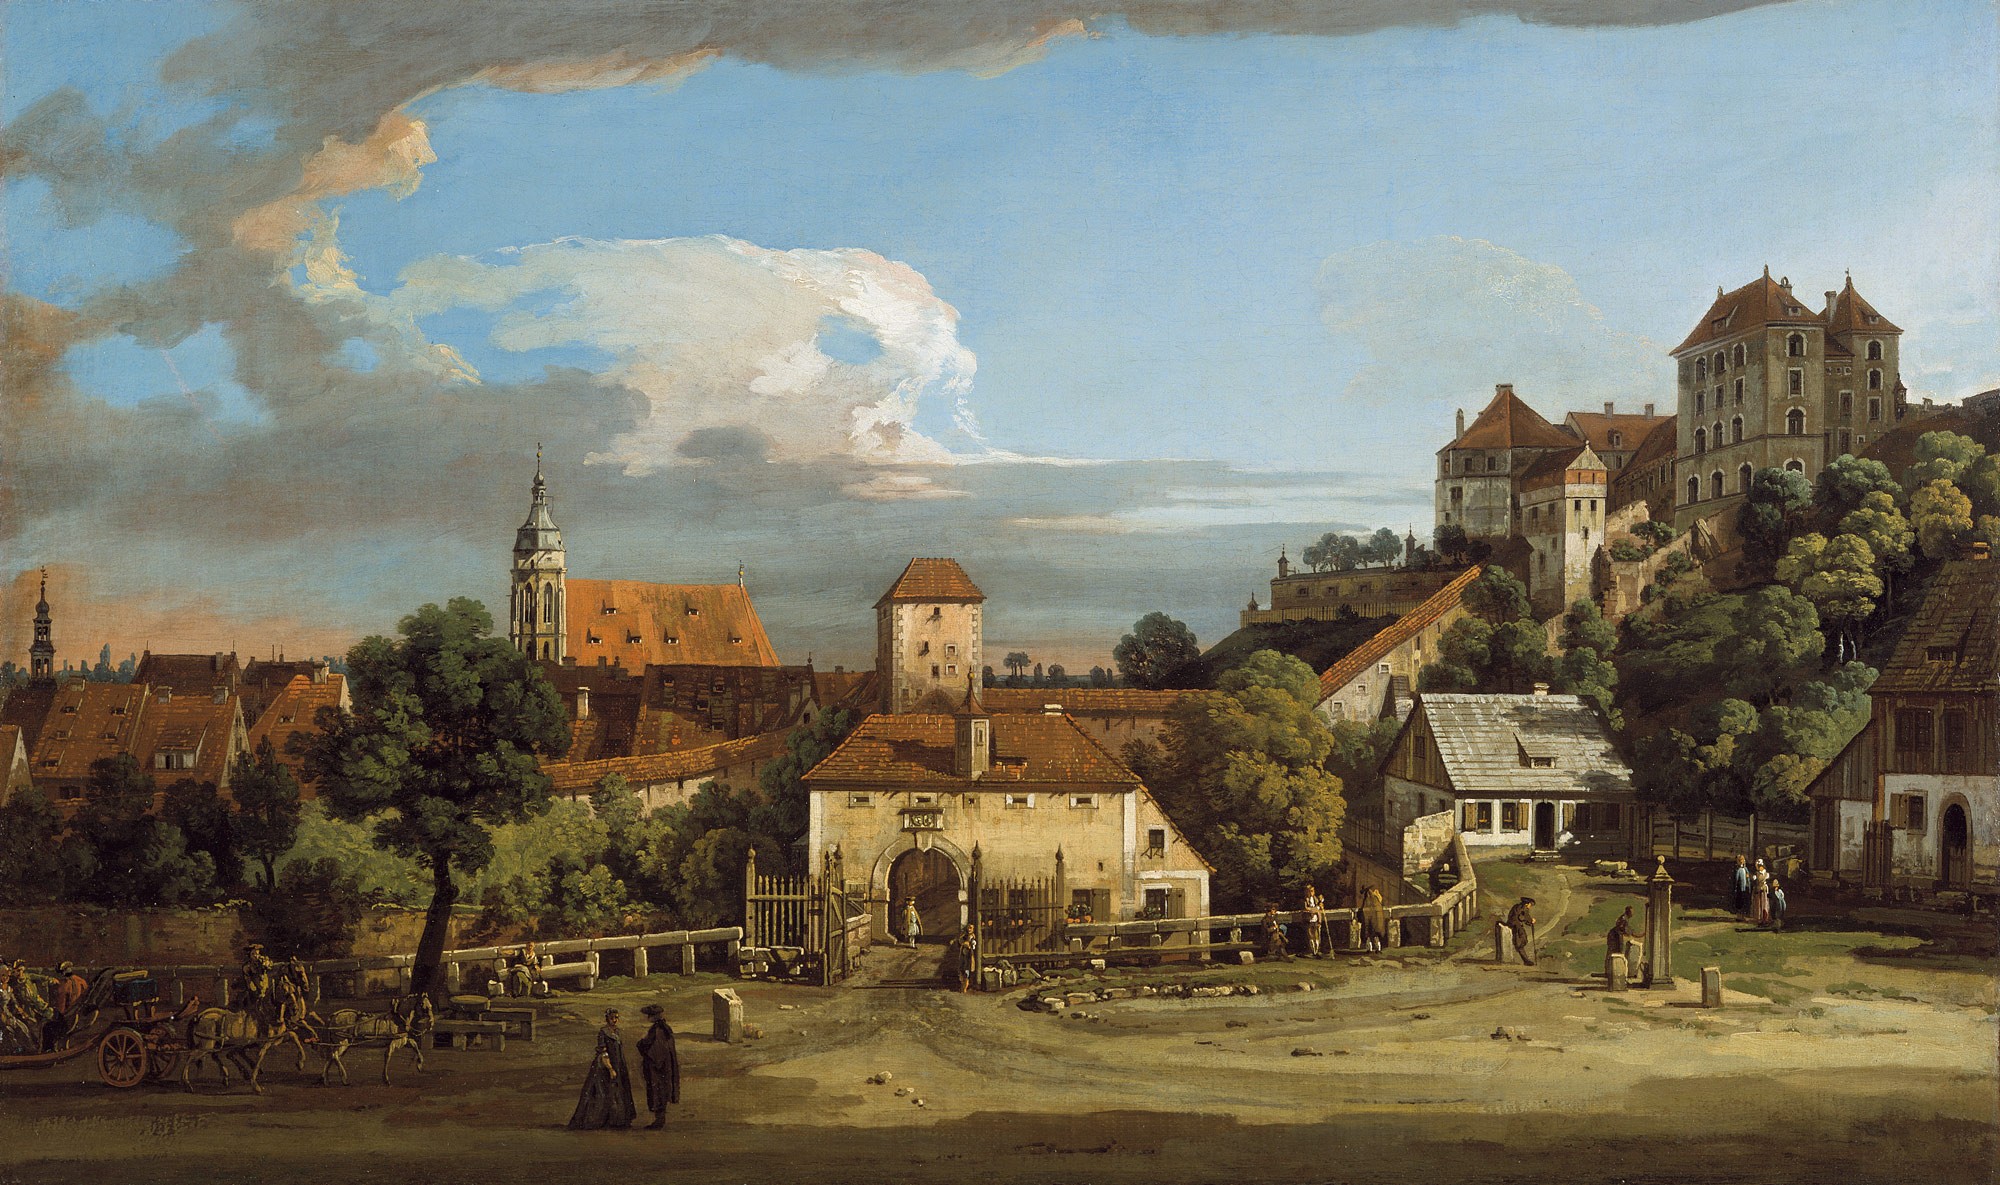 people, Artwork, Painting, Architecture, Building, Pirna, Germany, Village, Trees, Church, Ancient Wallpaper